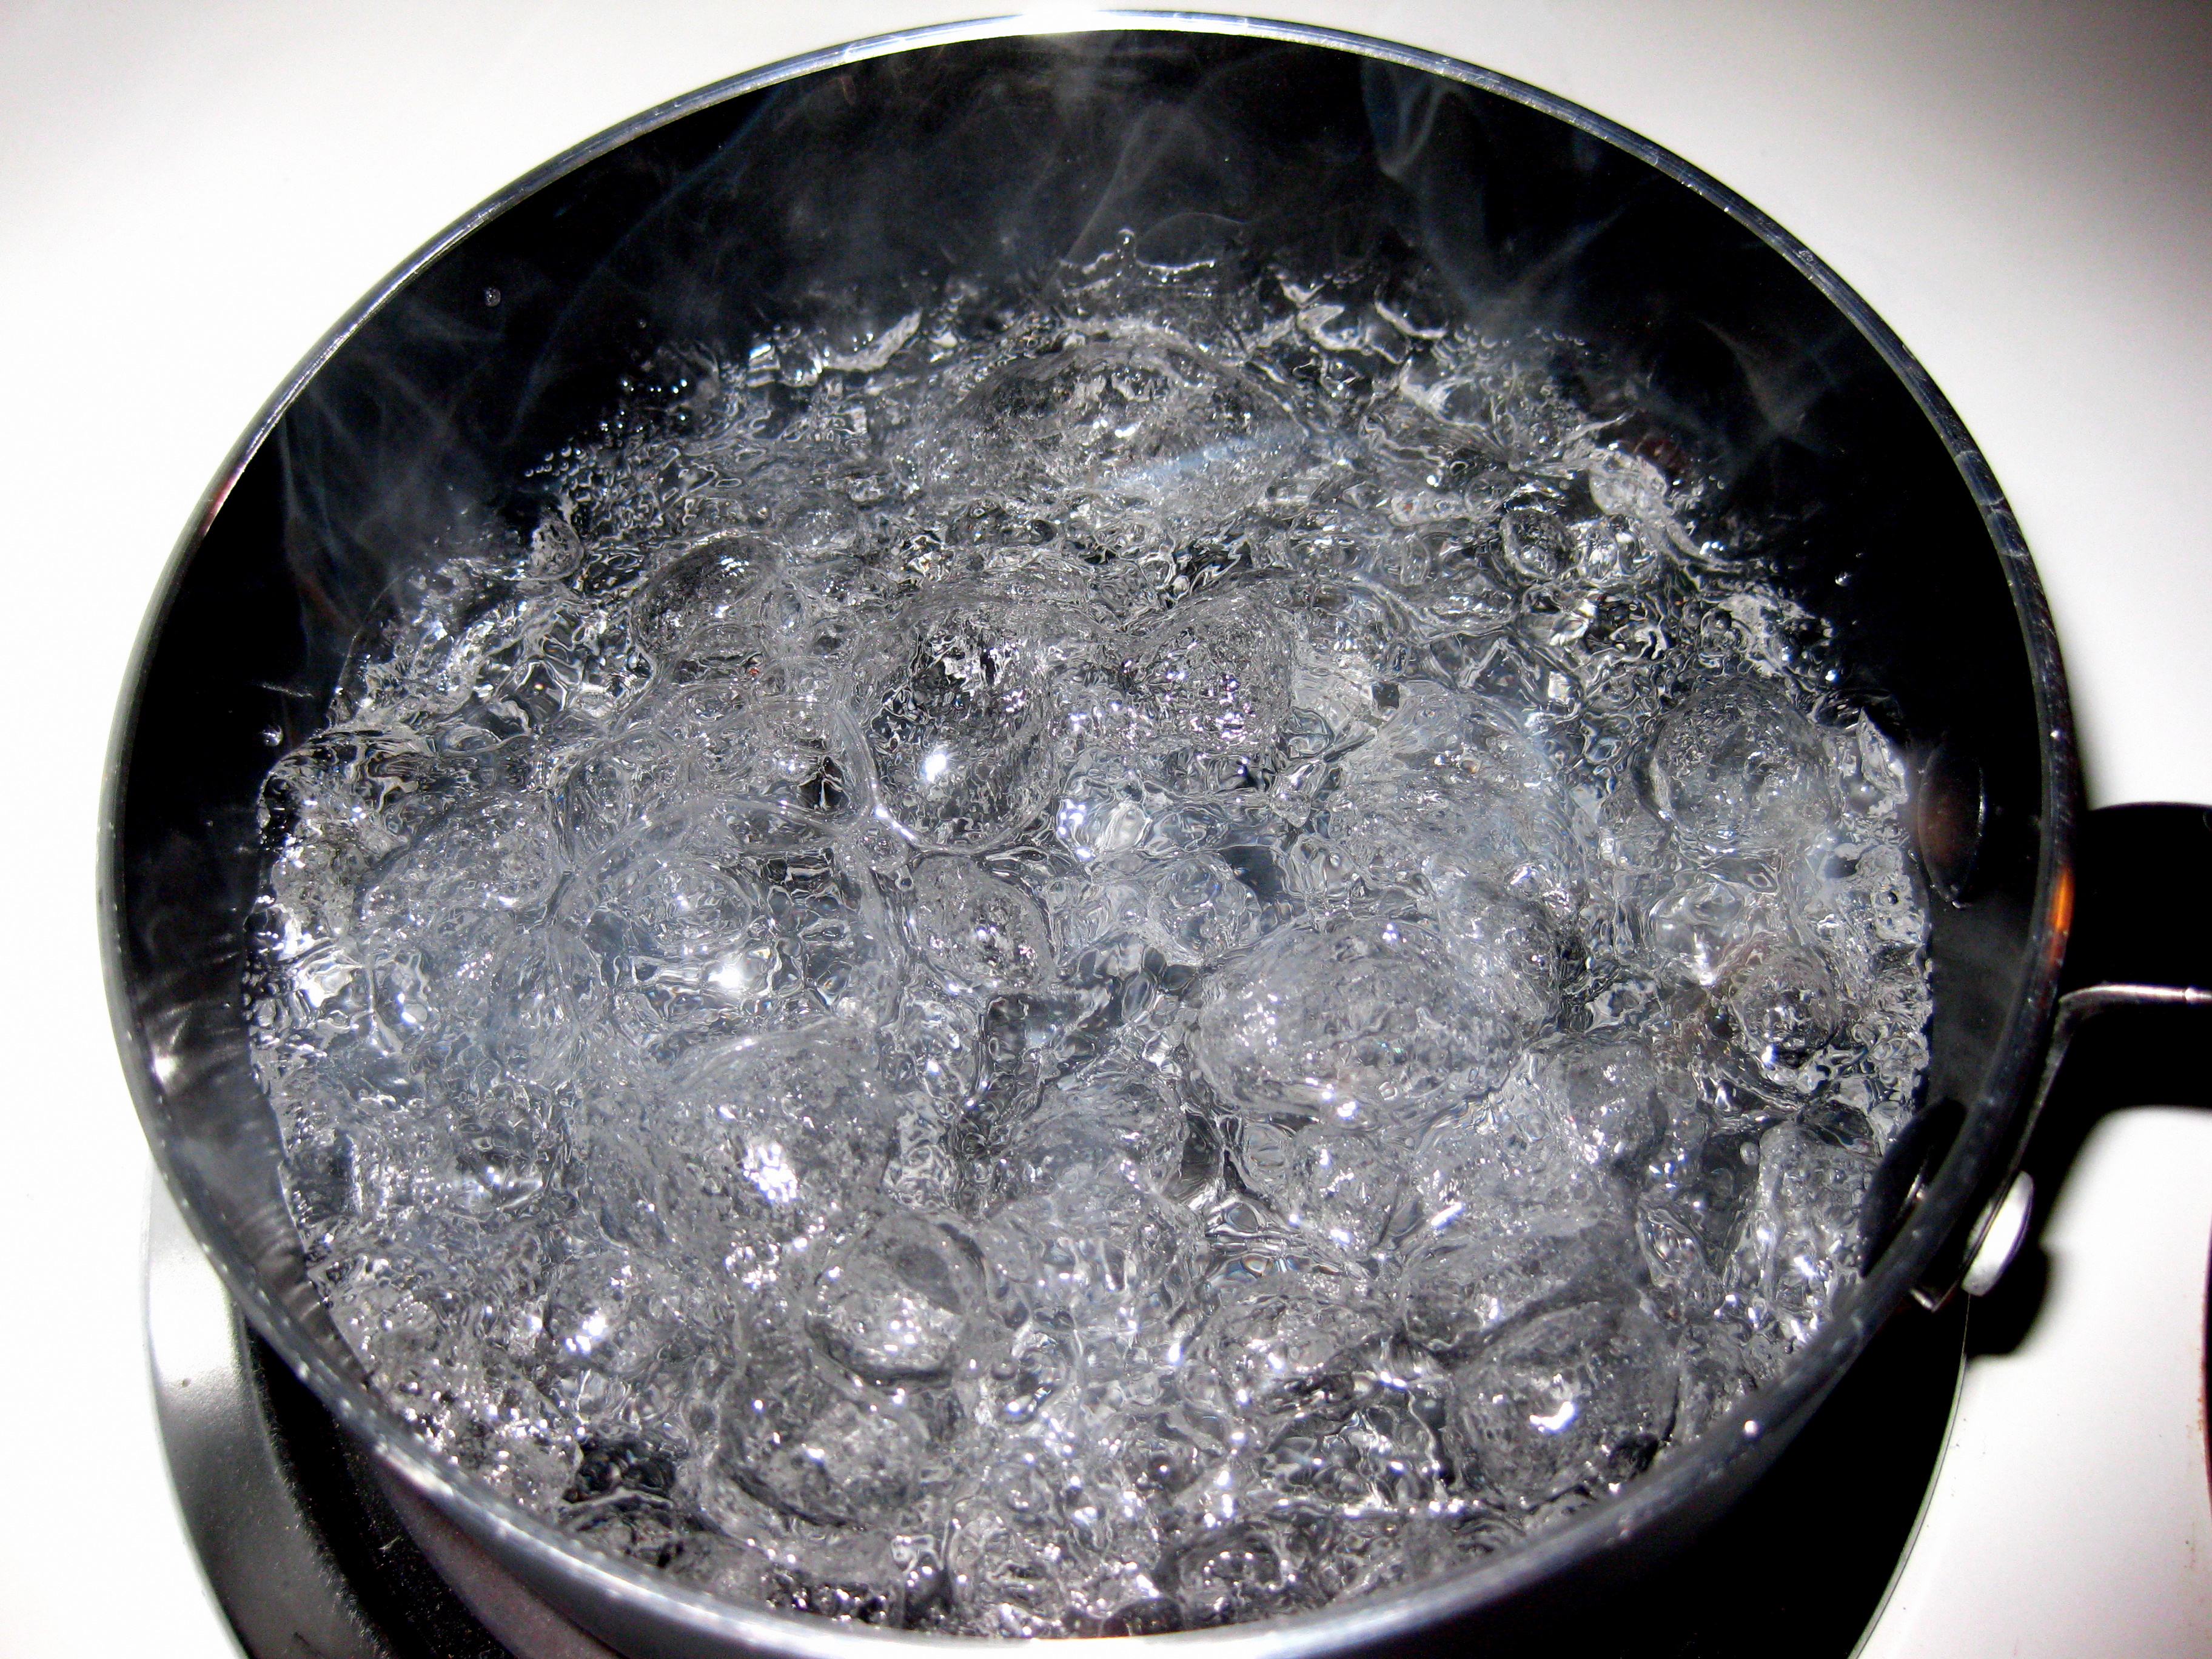 Does Boiling Your Water Make It Safe to Drink?